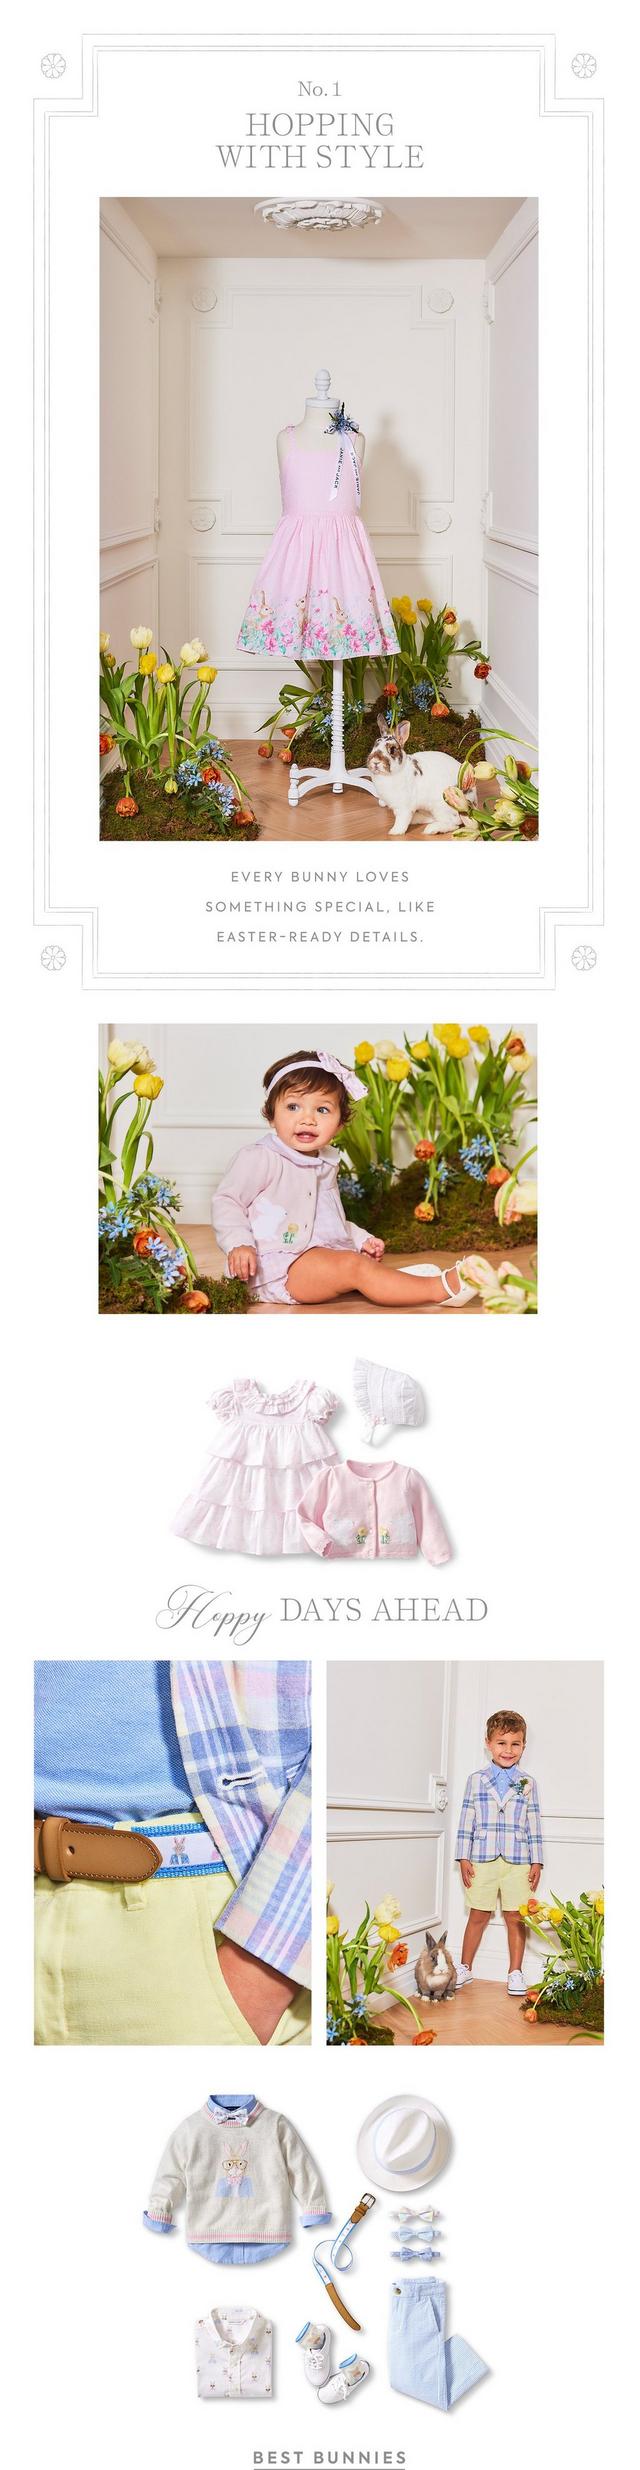 No. 1: Hopping with Style. Every bunny loves something special, like Easter-ready details. Explore the Bunny Shop. 